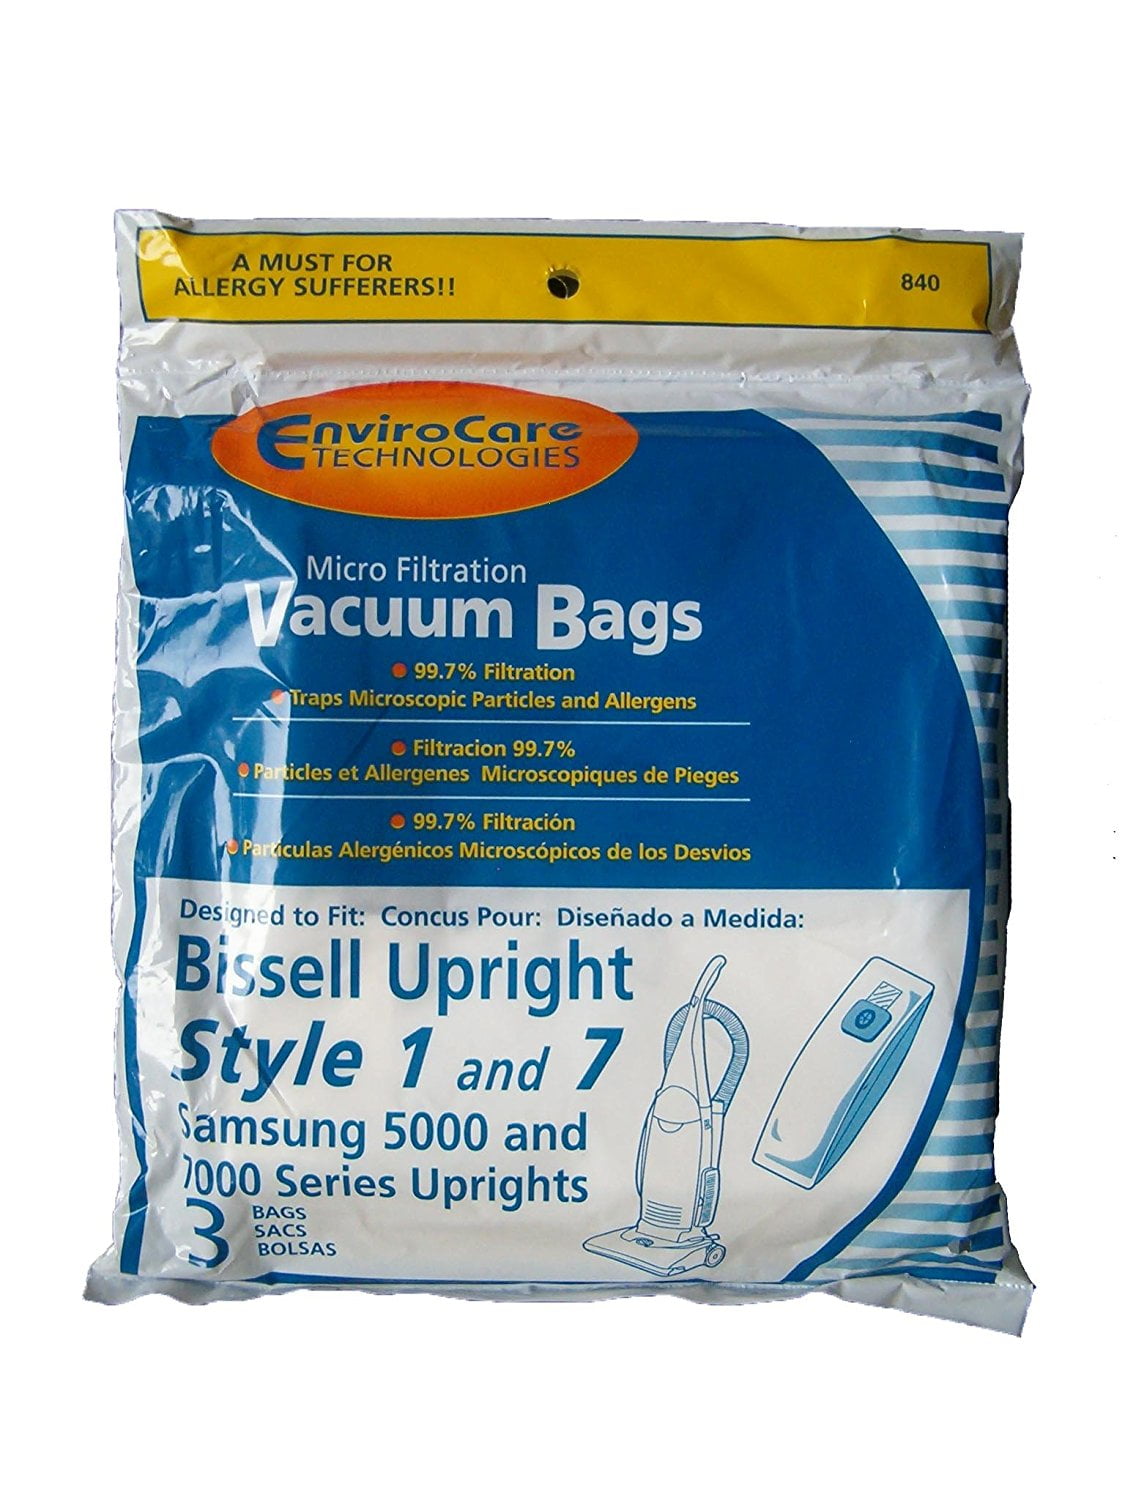 Micro Filtration Vacuum Bags Bissell Upright Style 1 and 7 3 Bags 